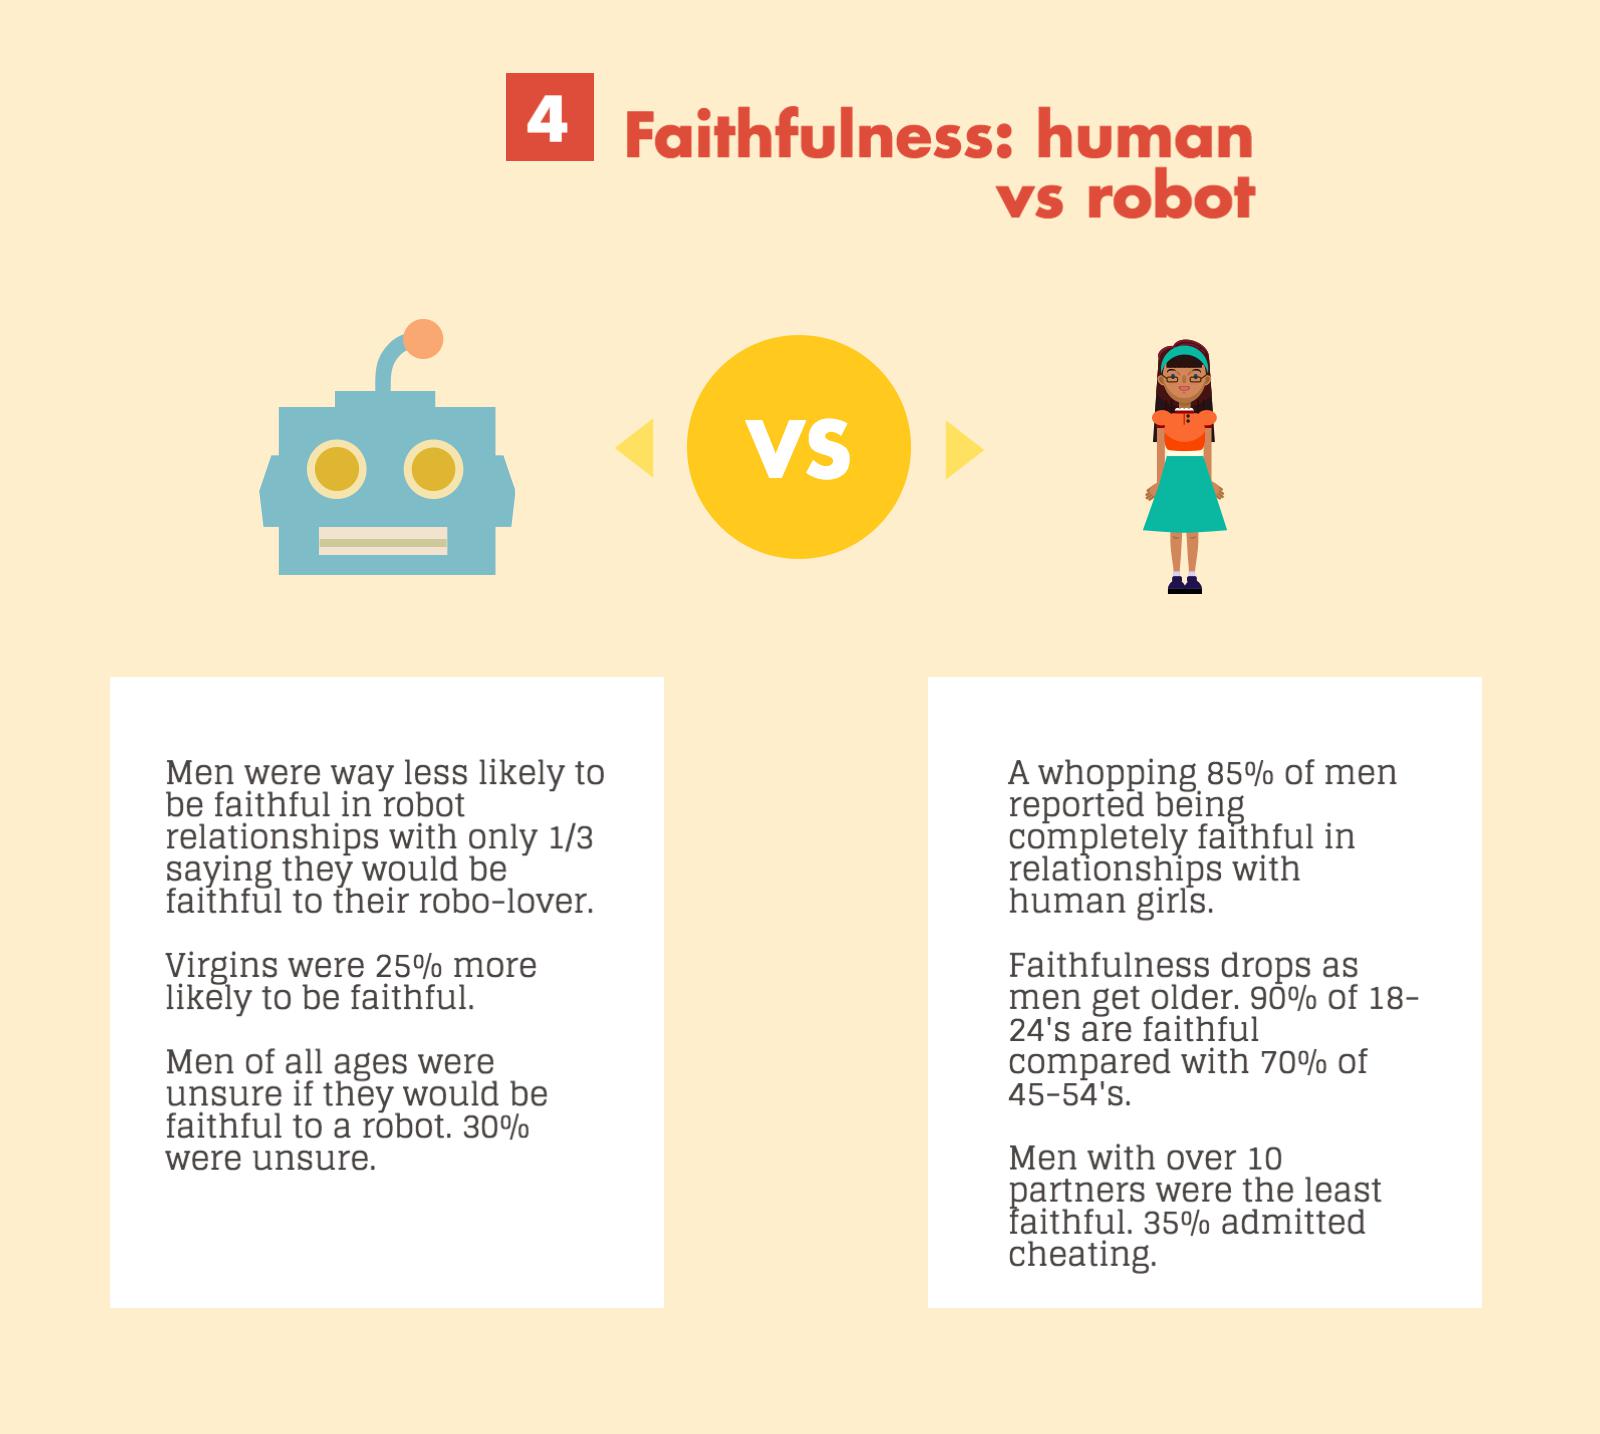 Faithfulness in human and robot relationships